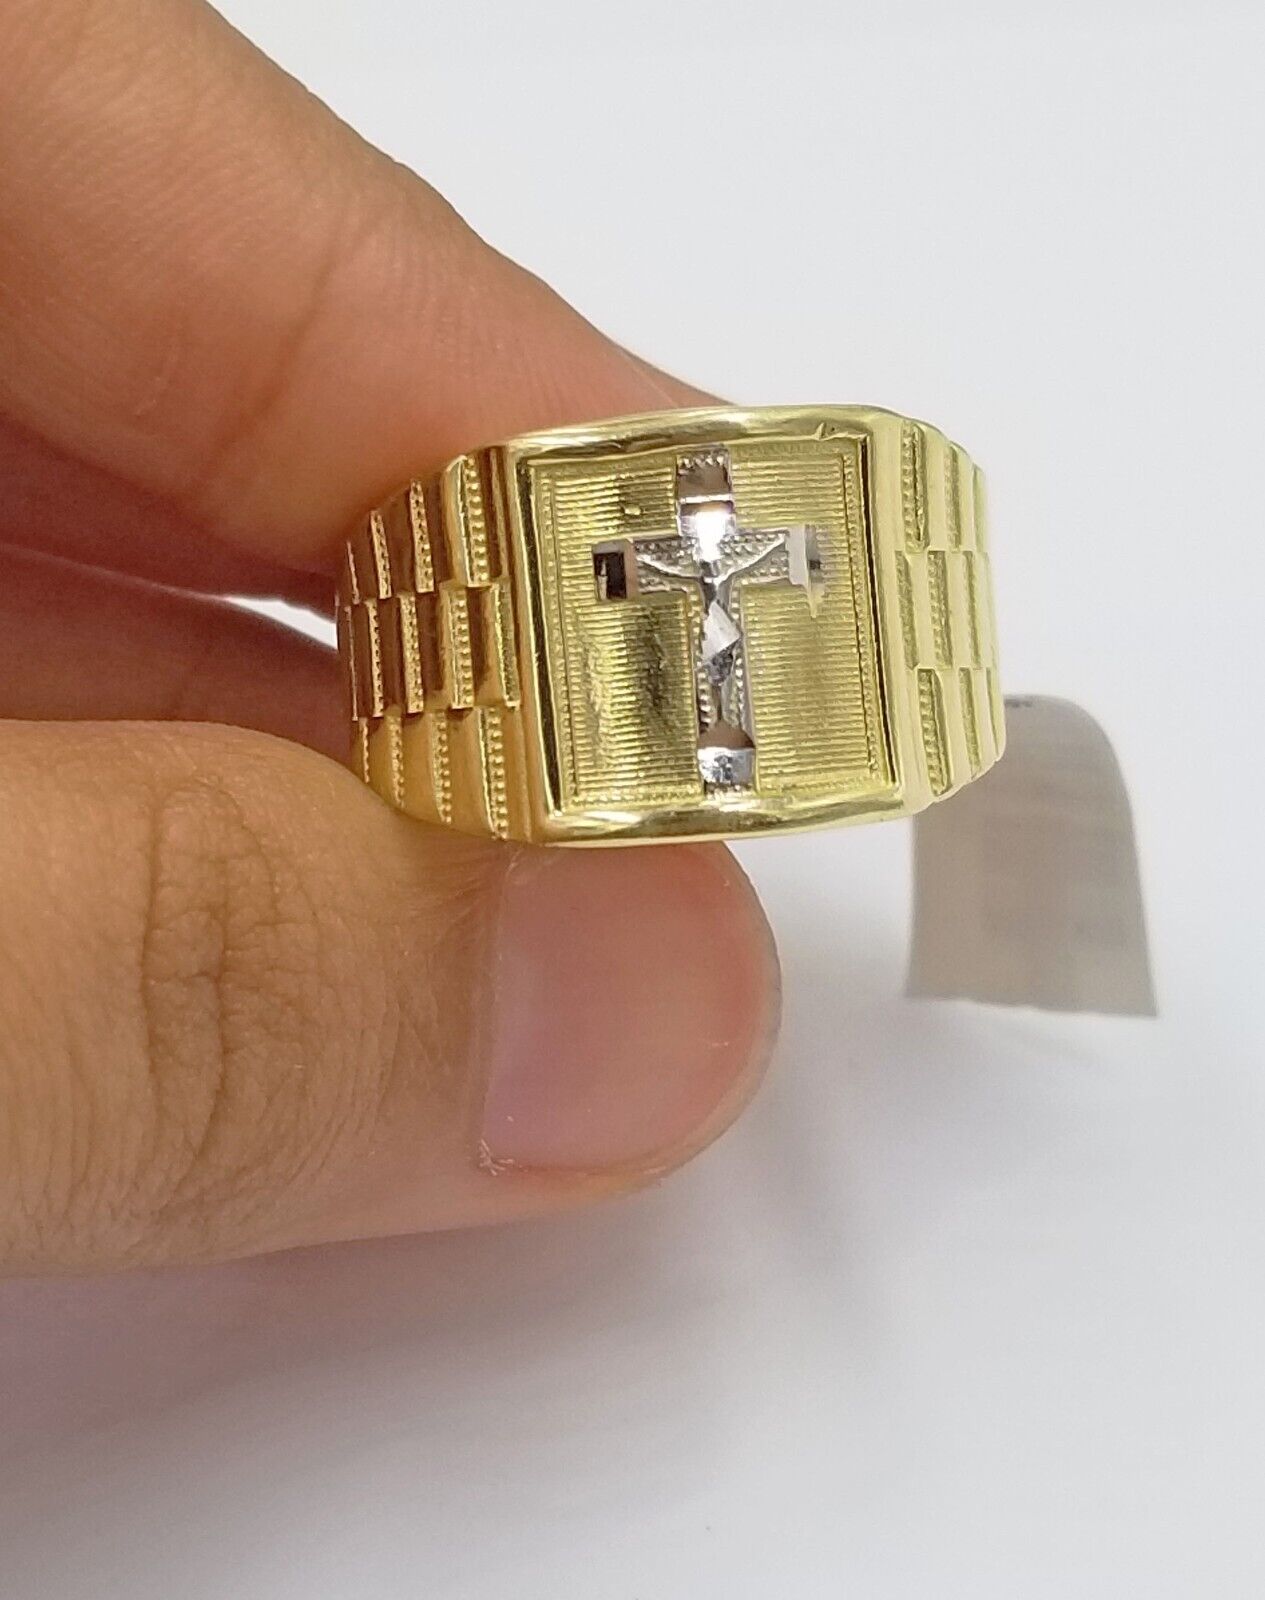 22K 916 Yellow Real Gold Mens Women's Unique Style Ring Fits 9/9.5” 5.6g |  eBay